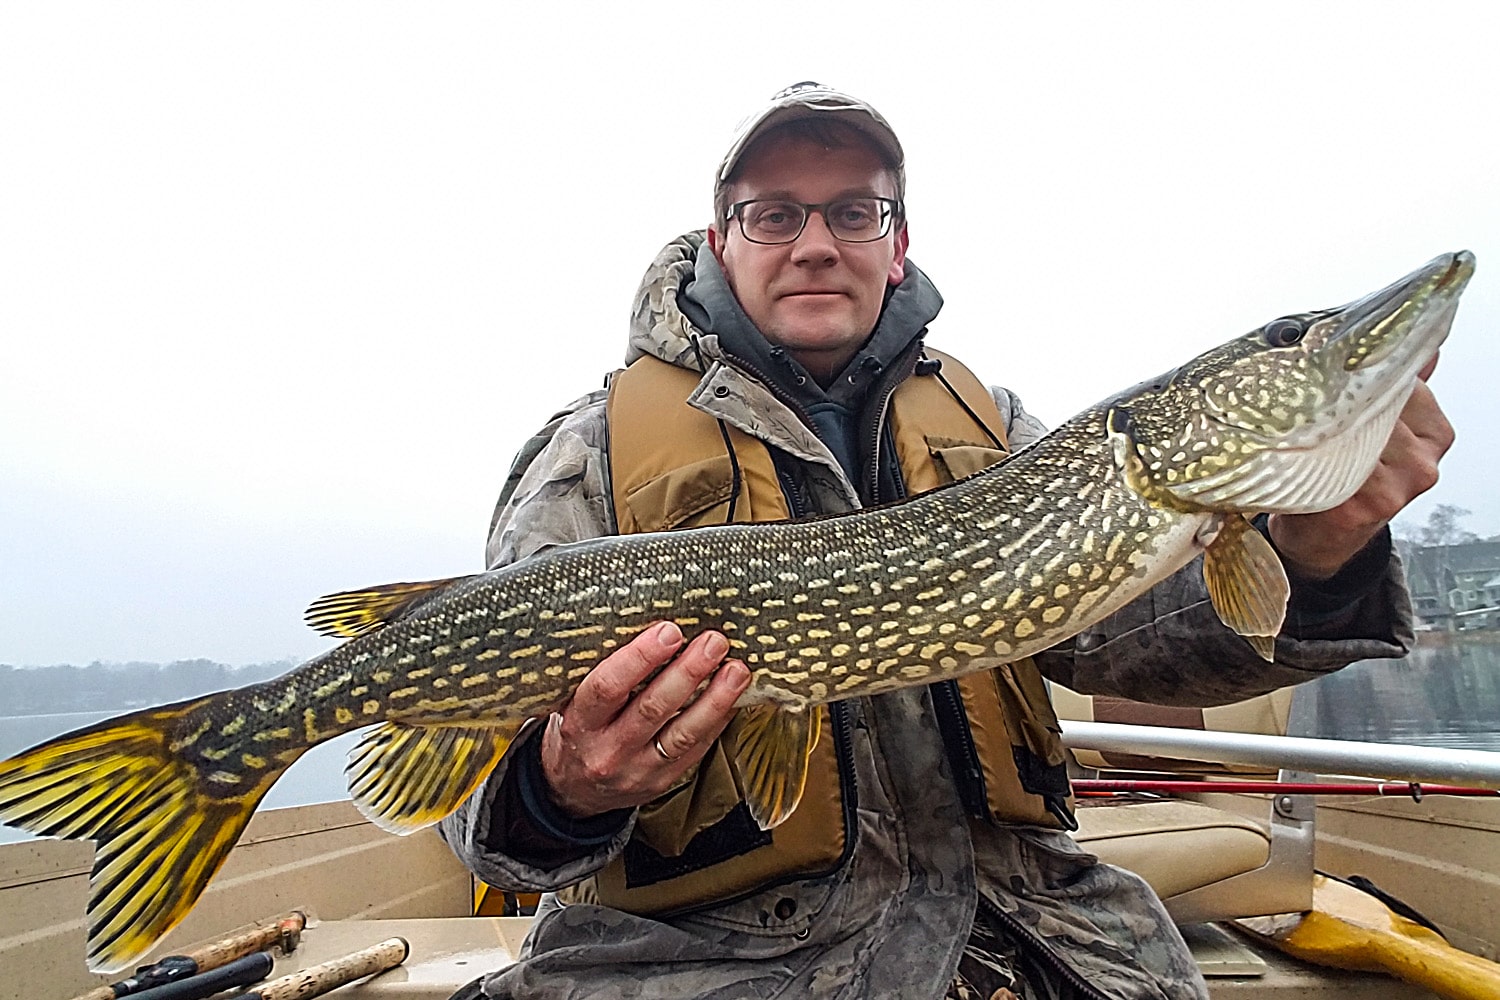 Illinois teen reels in record-setting northern pike in Boundary Waters